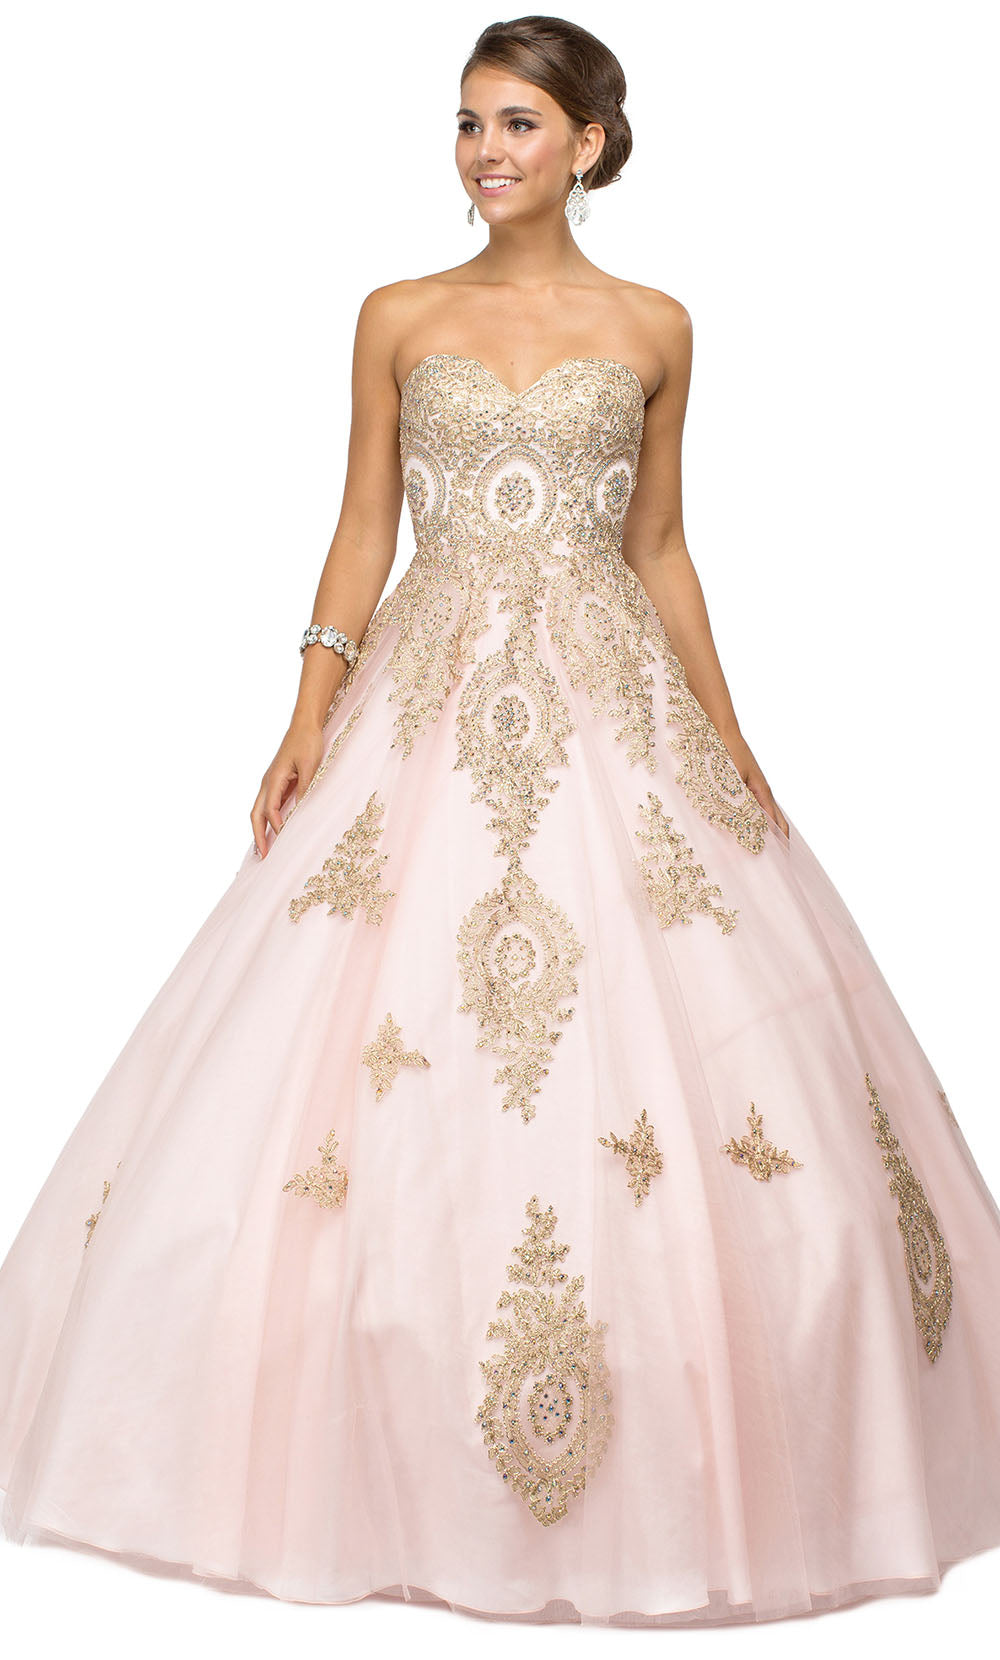 Dancing Queen - 1105 Strapless Metallic Lace Appliques Ballgown In Pink